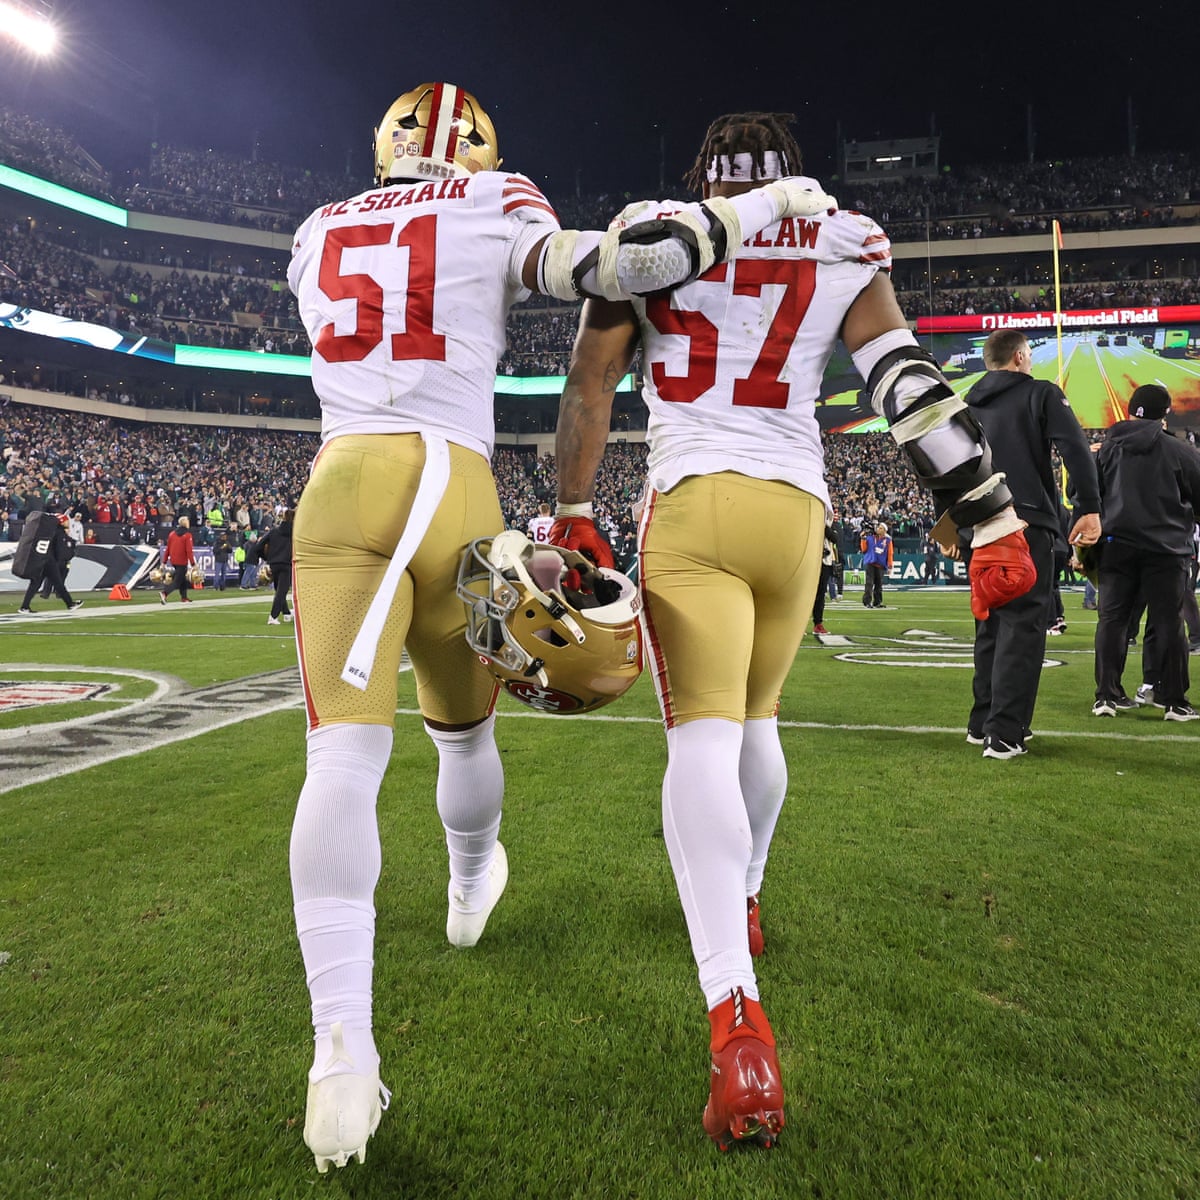 Life punches you in the face': 49ers rue QB woes after NFC title